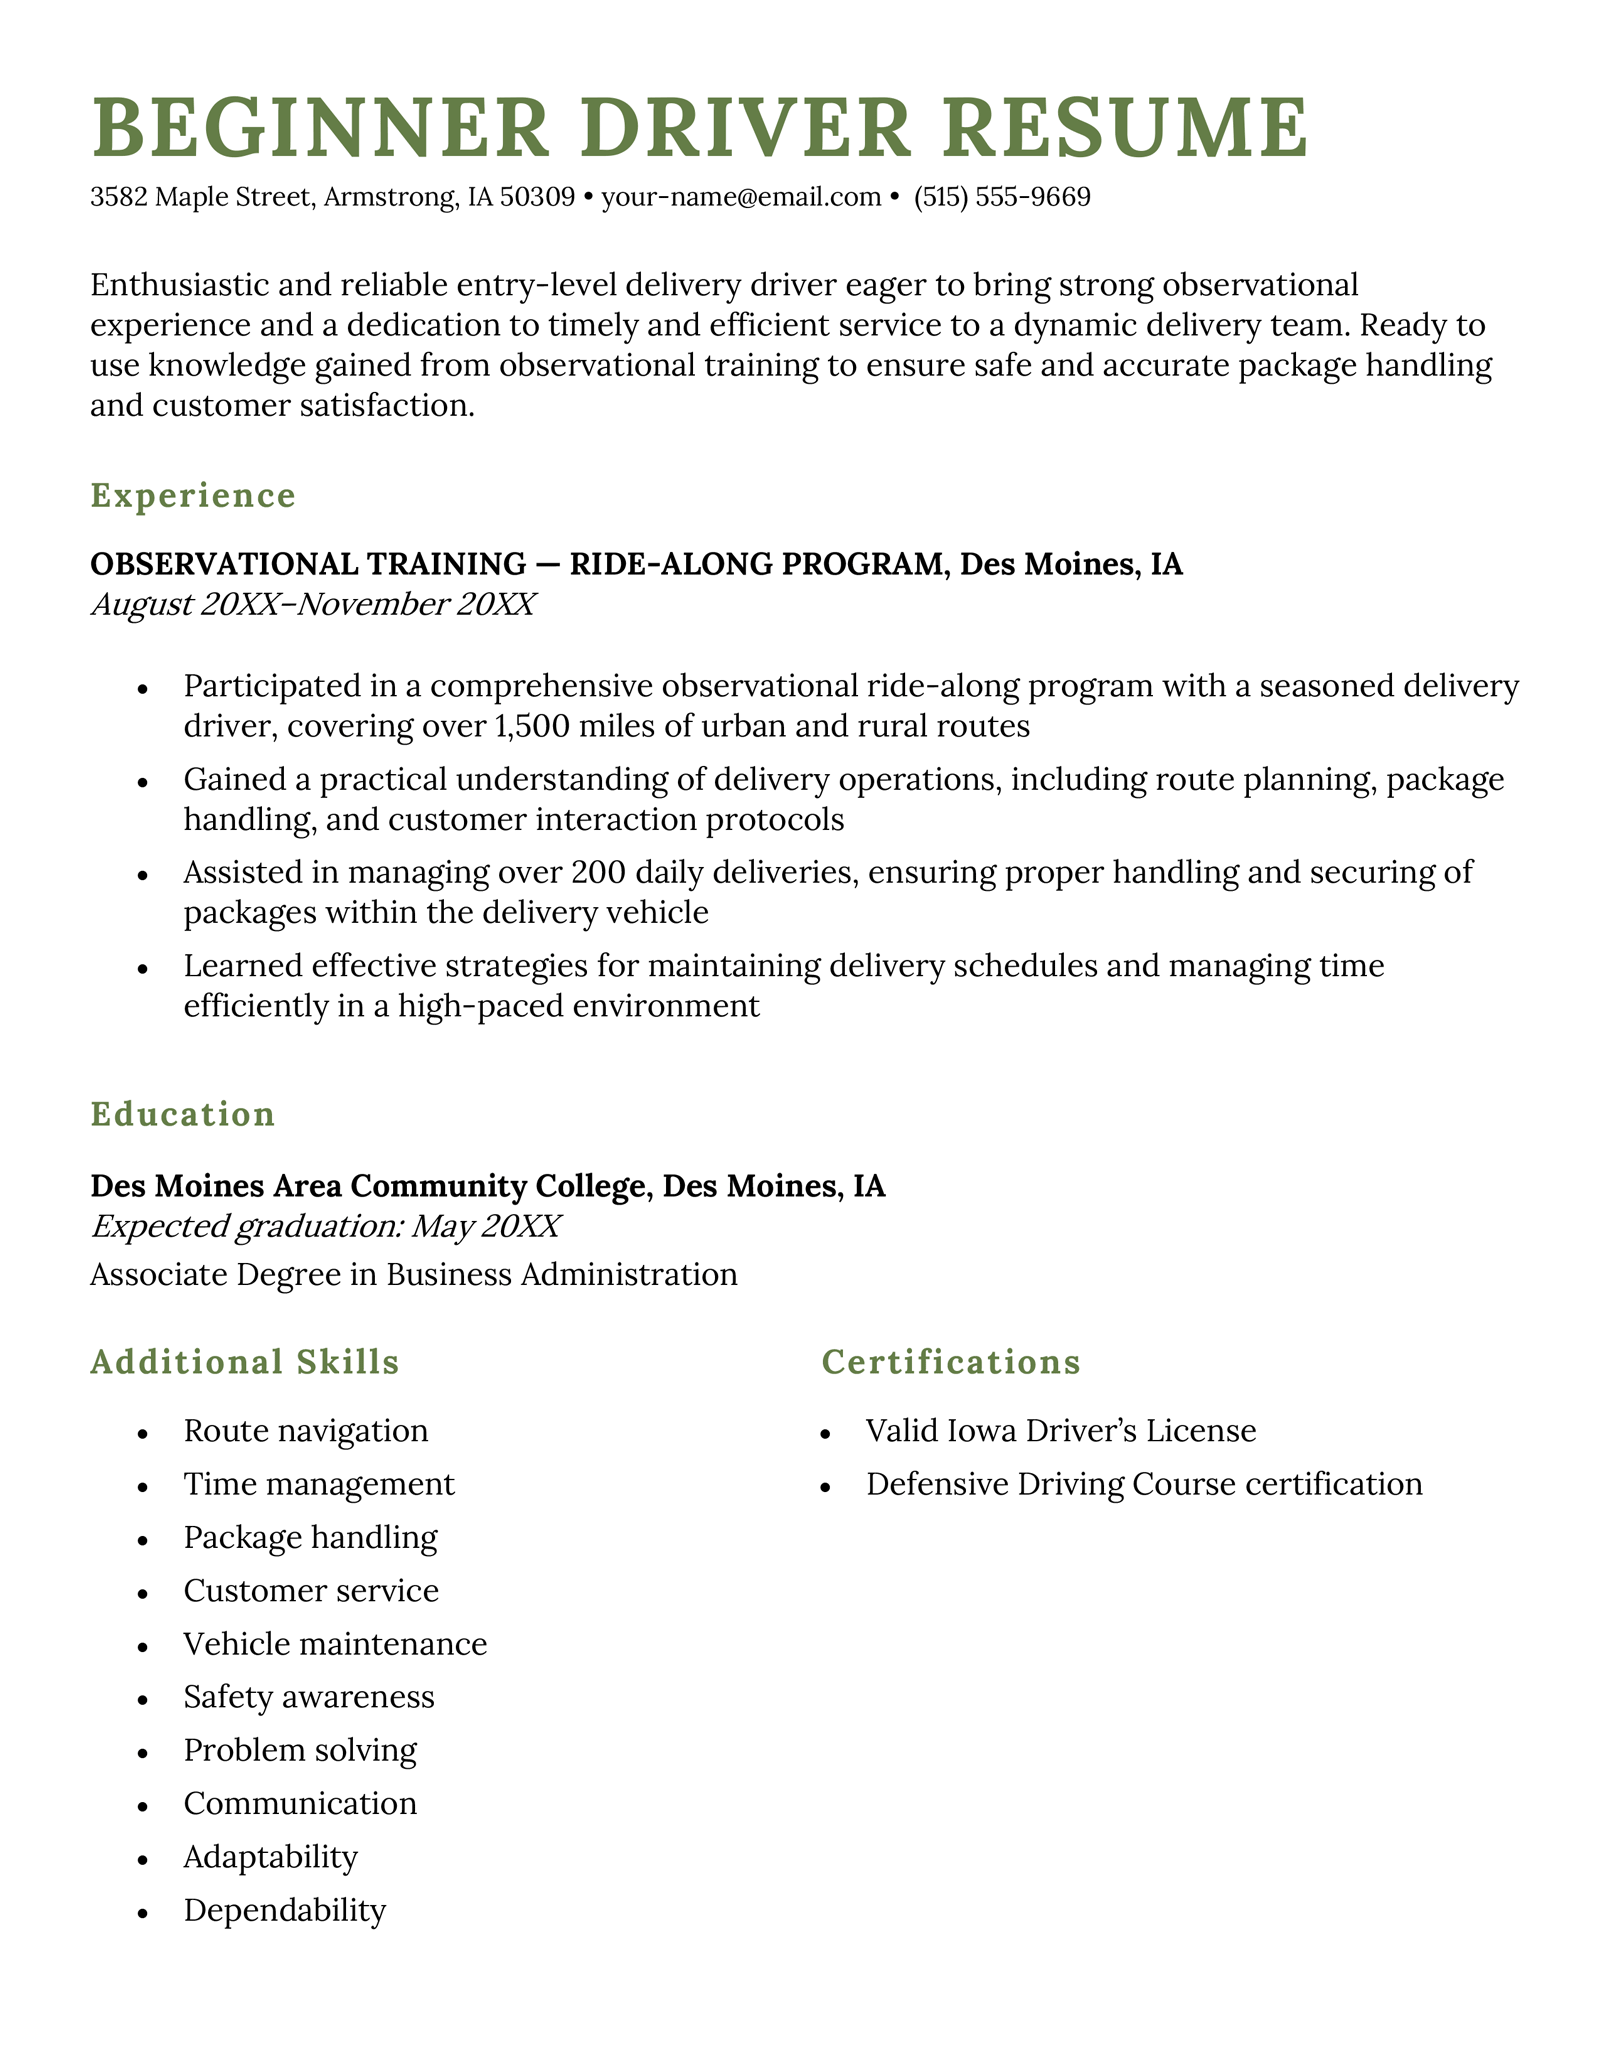 A beginner driver resume example that features training experience.